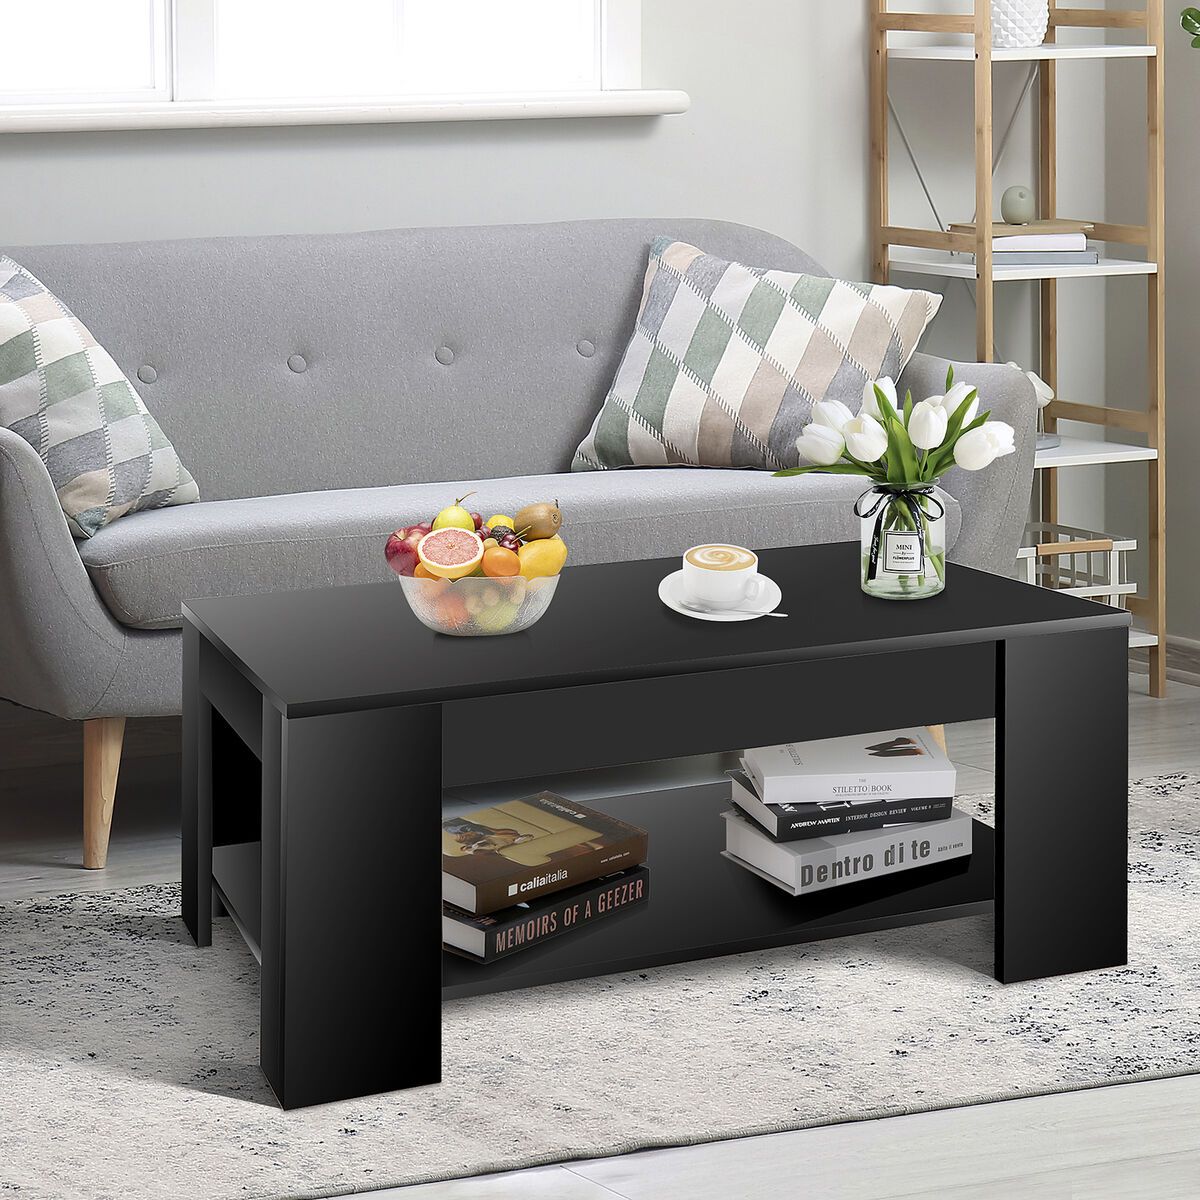 Lift Top Coffee Table Hidden Compartment Storage Shelves Modern Furniture,  Black | Ebay In Modern Coffee Tables With Hidden Storage Compartments (View 12 of 15)